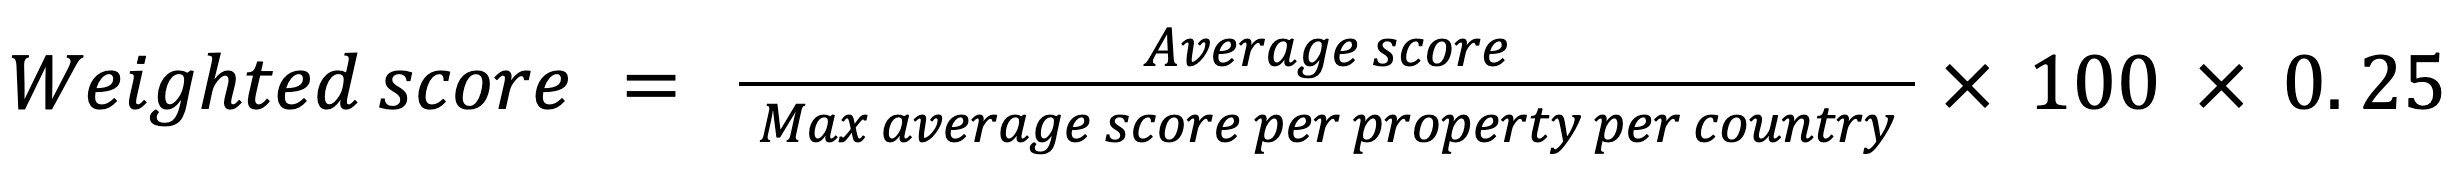 Weighted score calculation